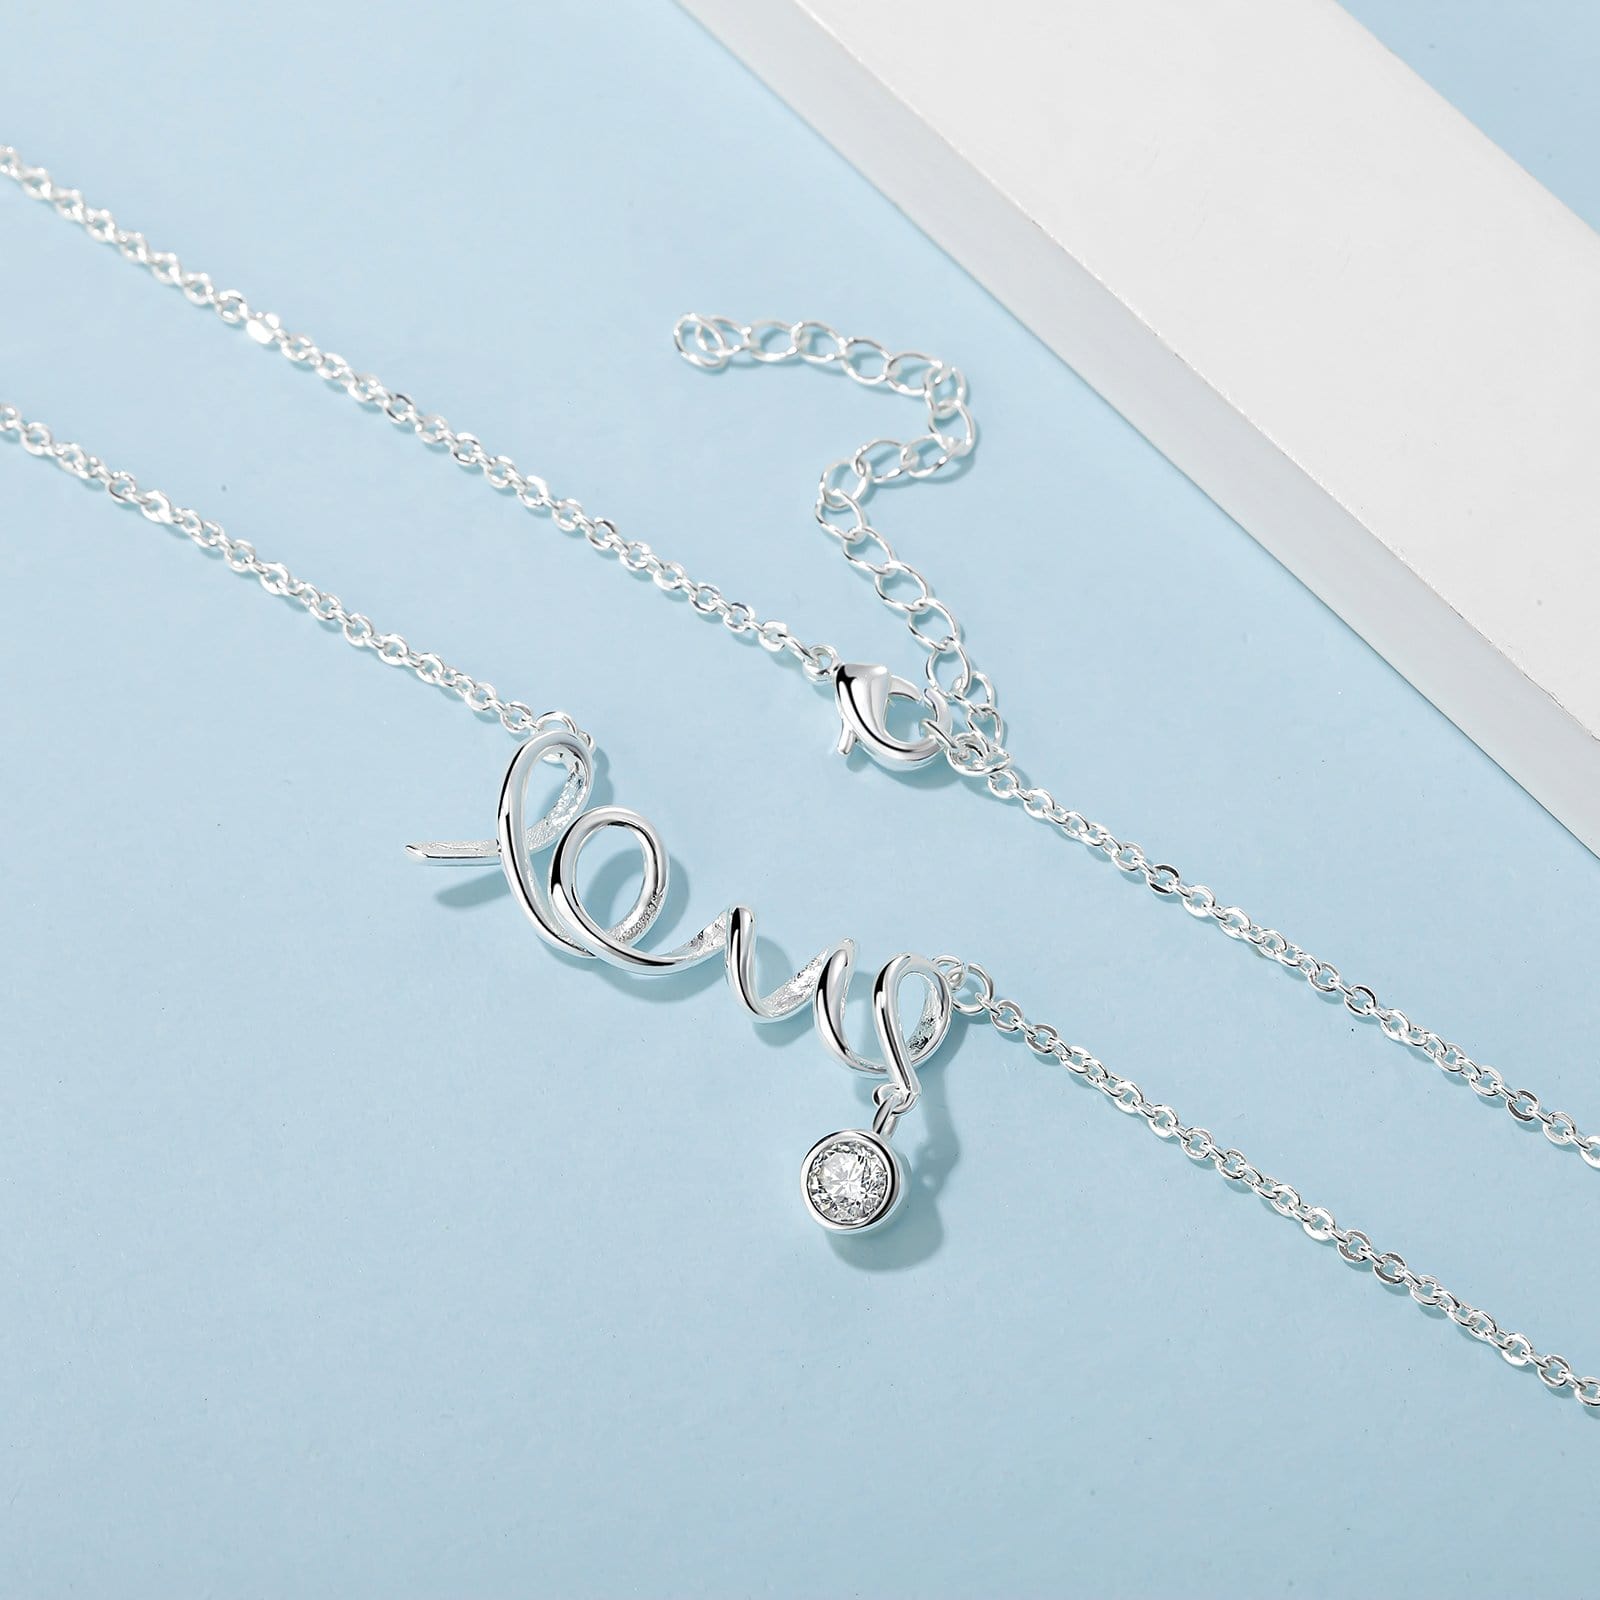 Necklaces To My Mom - Thank You Love Pendant Necklace GiveMe-Gifts